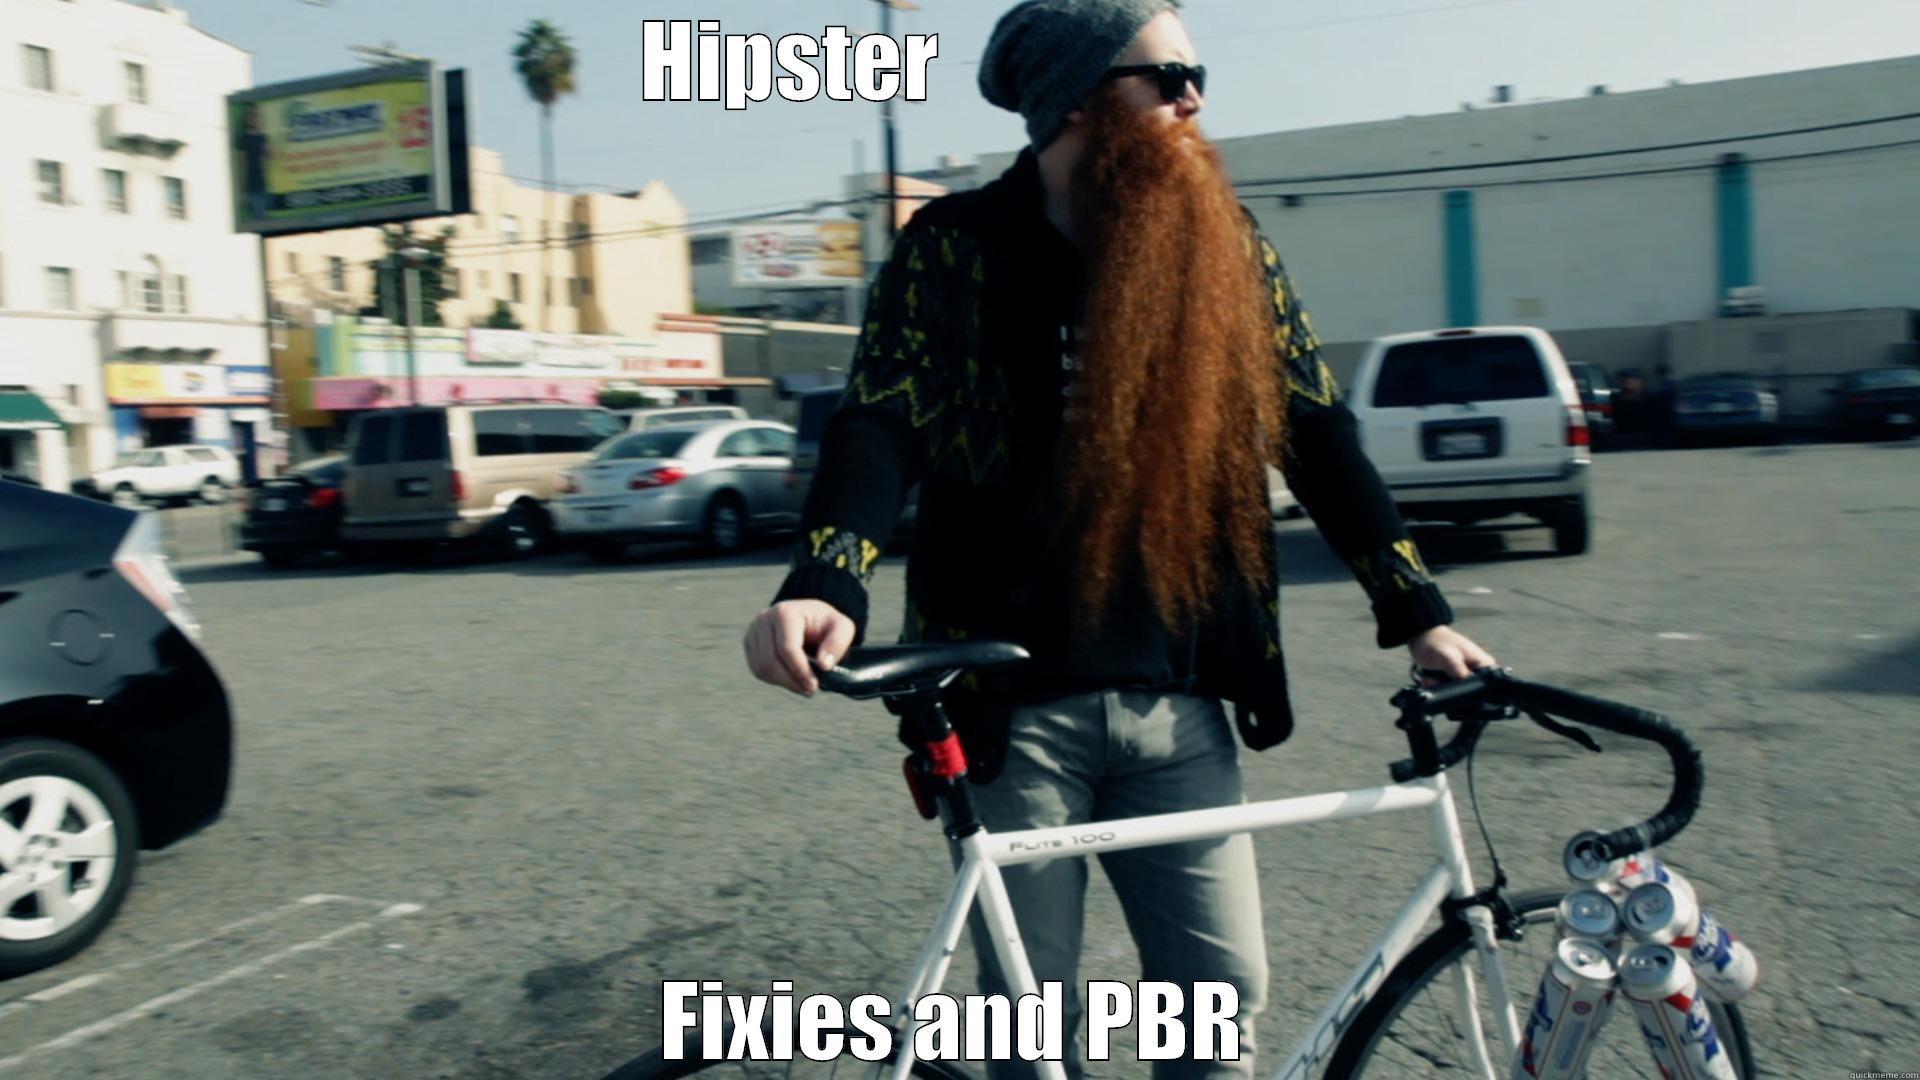 Fixie Hipster - HIPSTER                   FIXIES AND PBR Misc